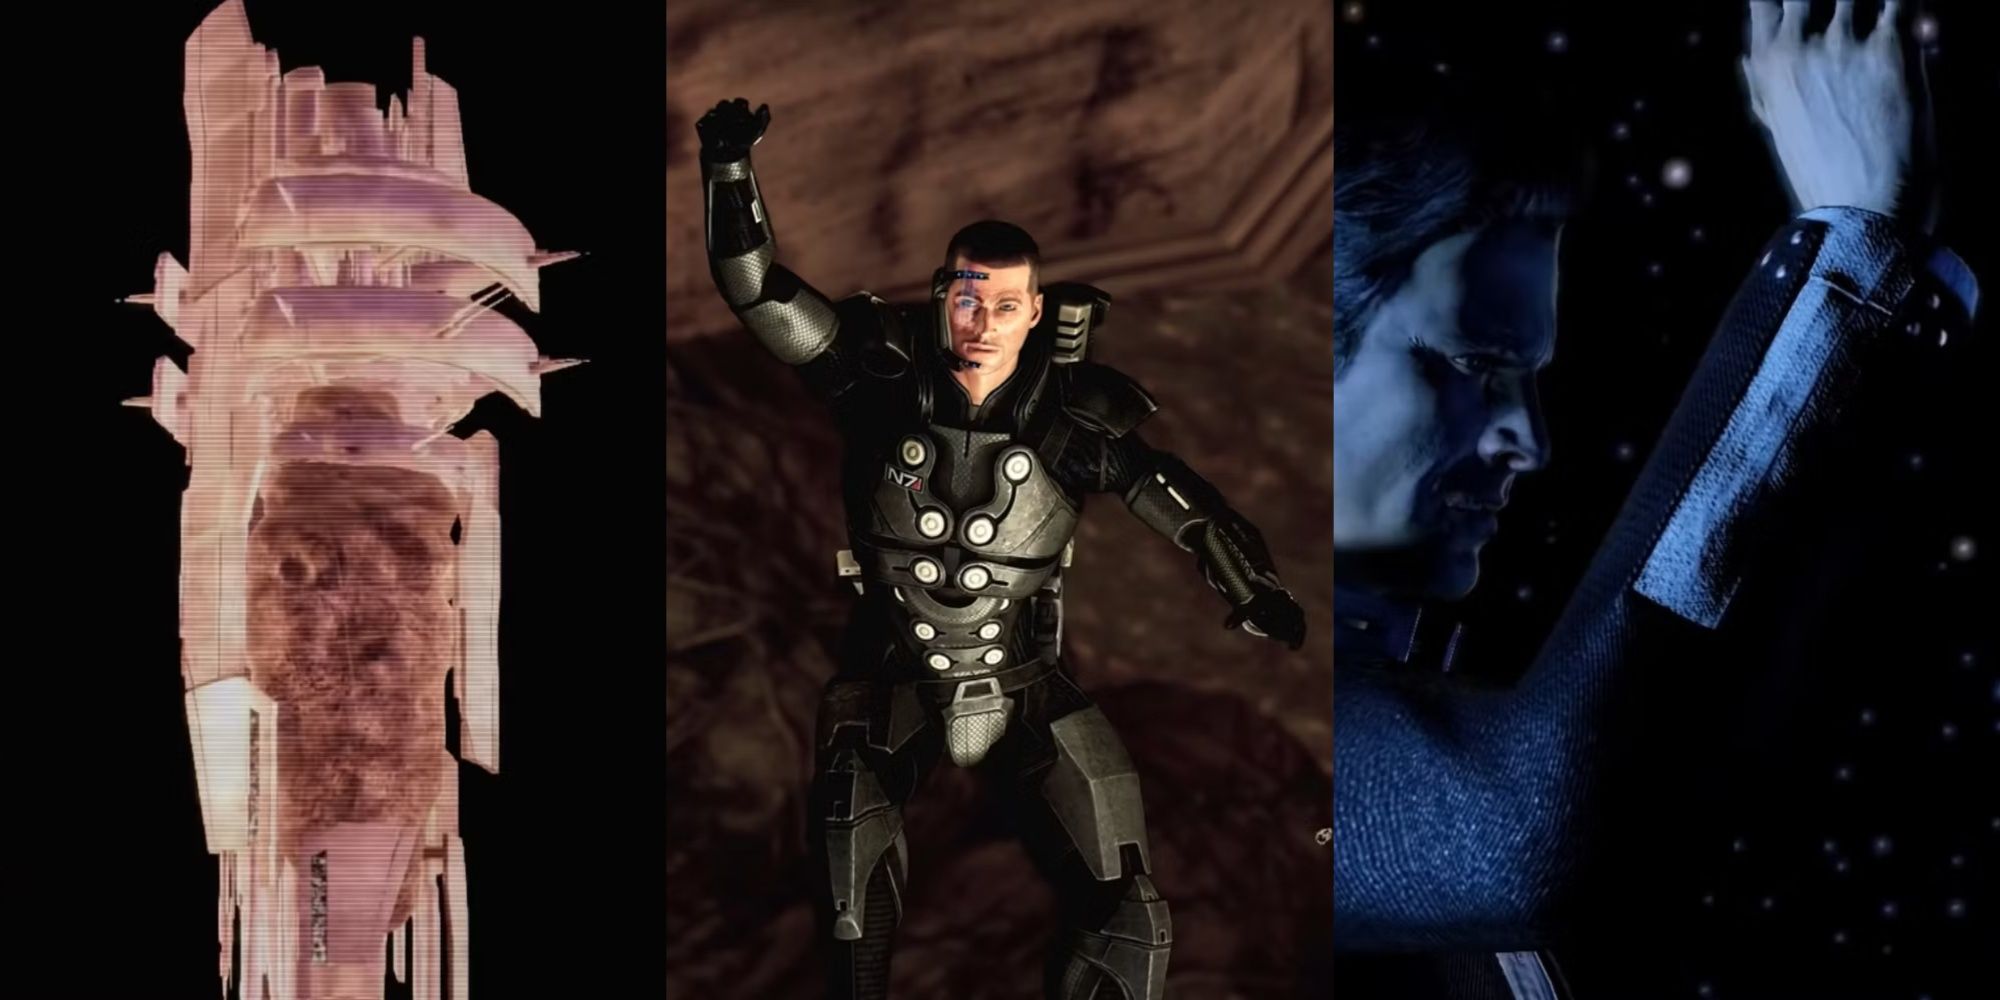 Mass Effect 2 Endings Split Image of Collector Base, Shepard Falling, and Illusive Man With His Arm in the air